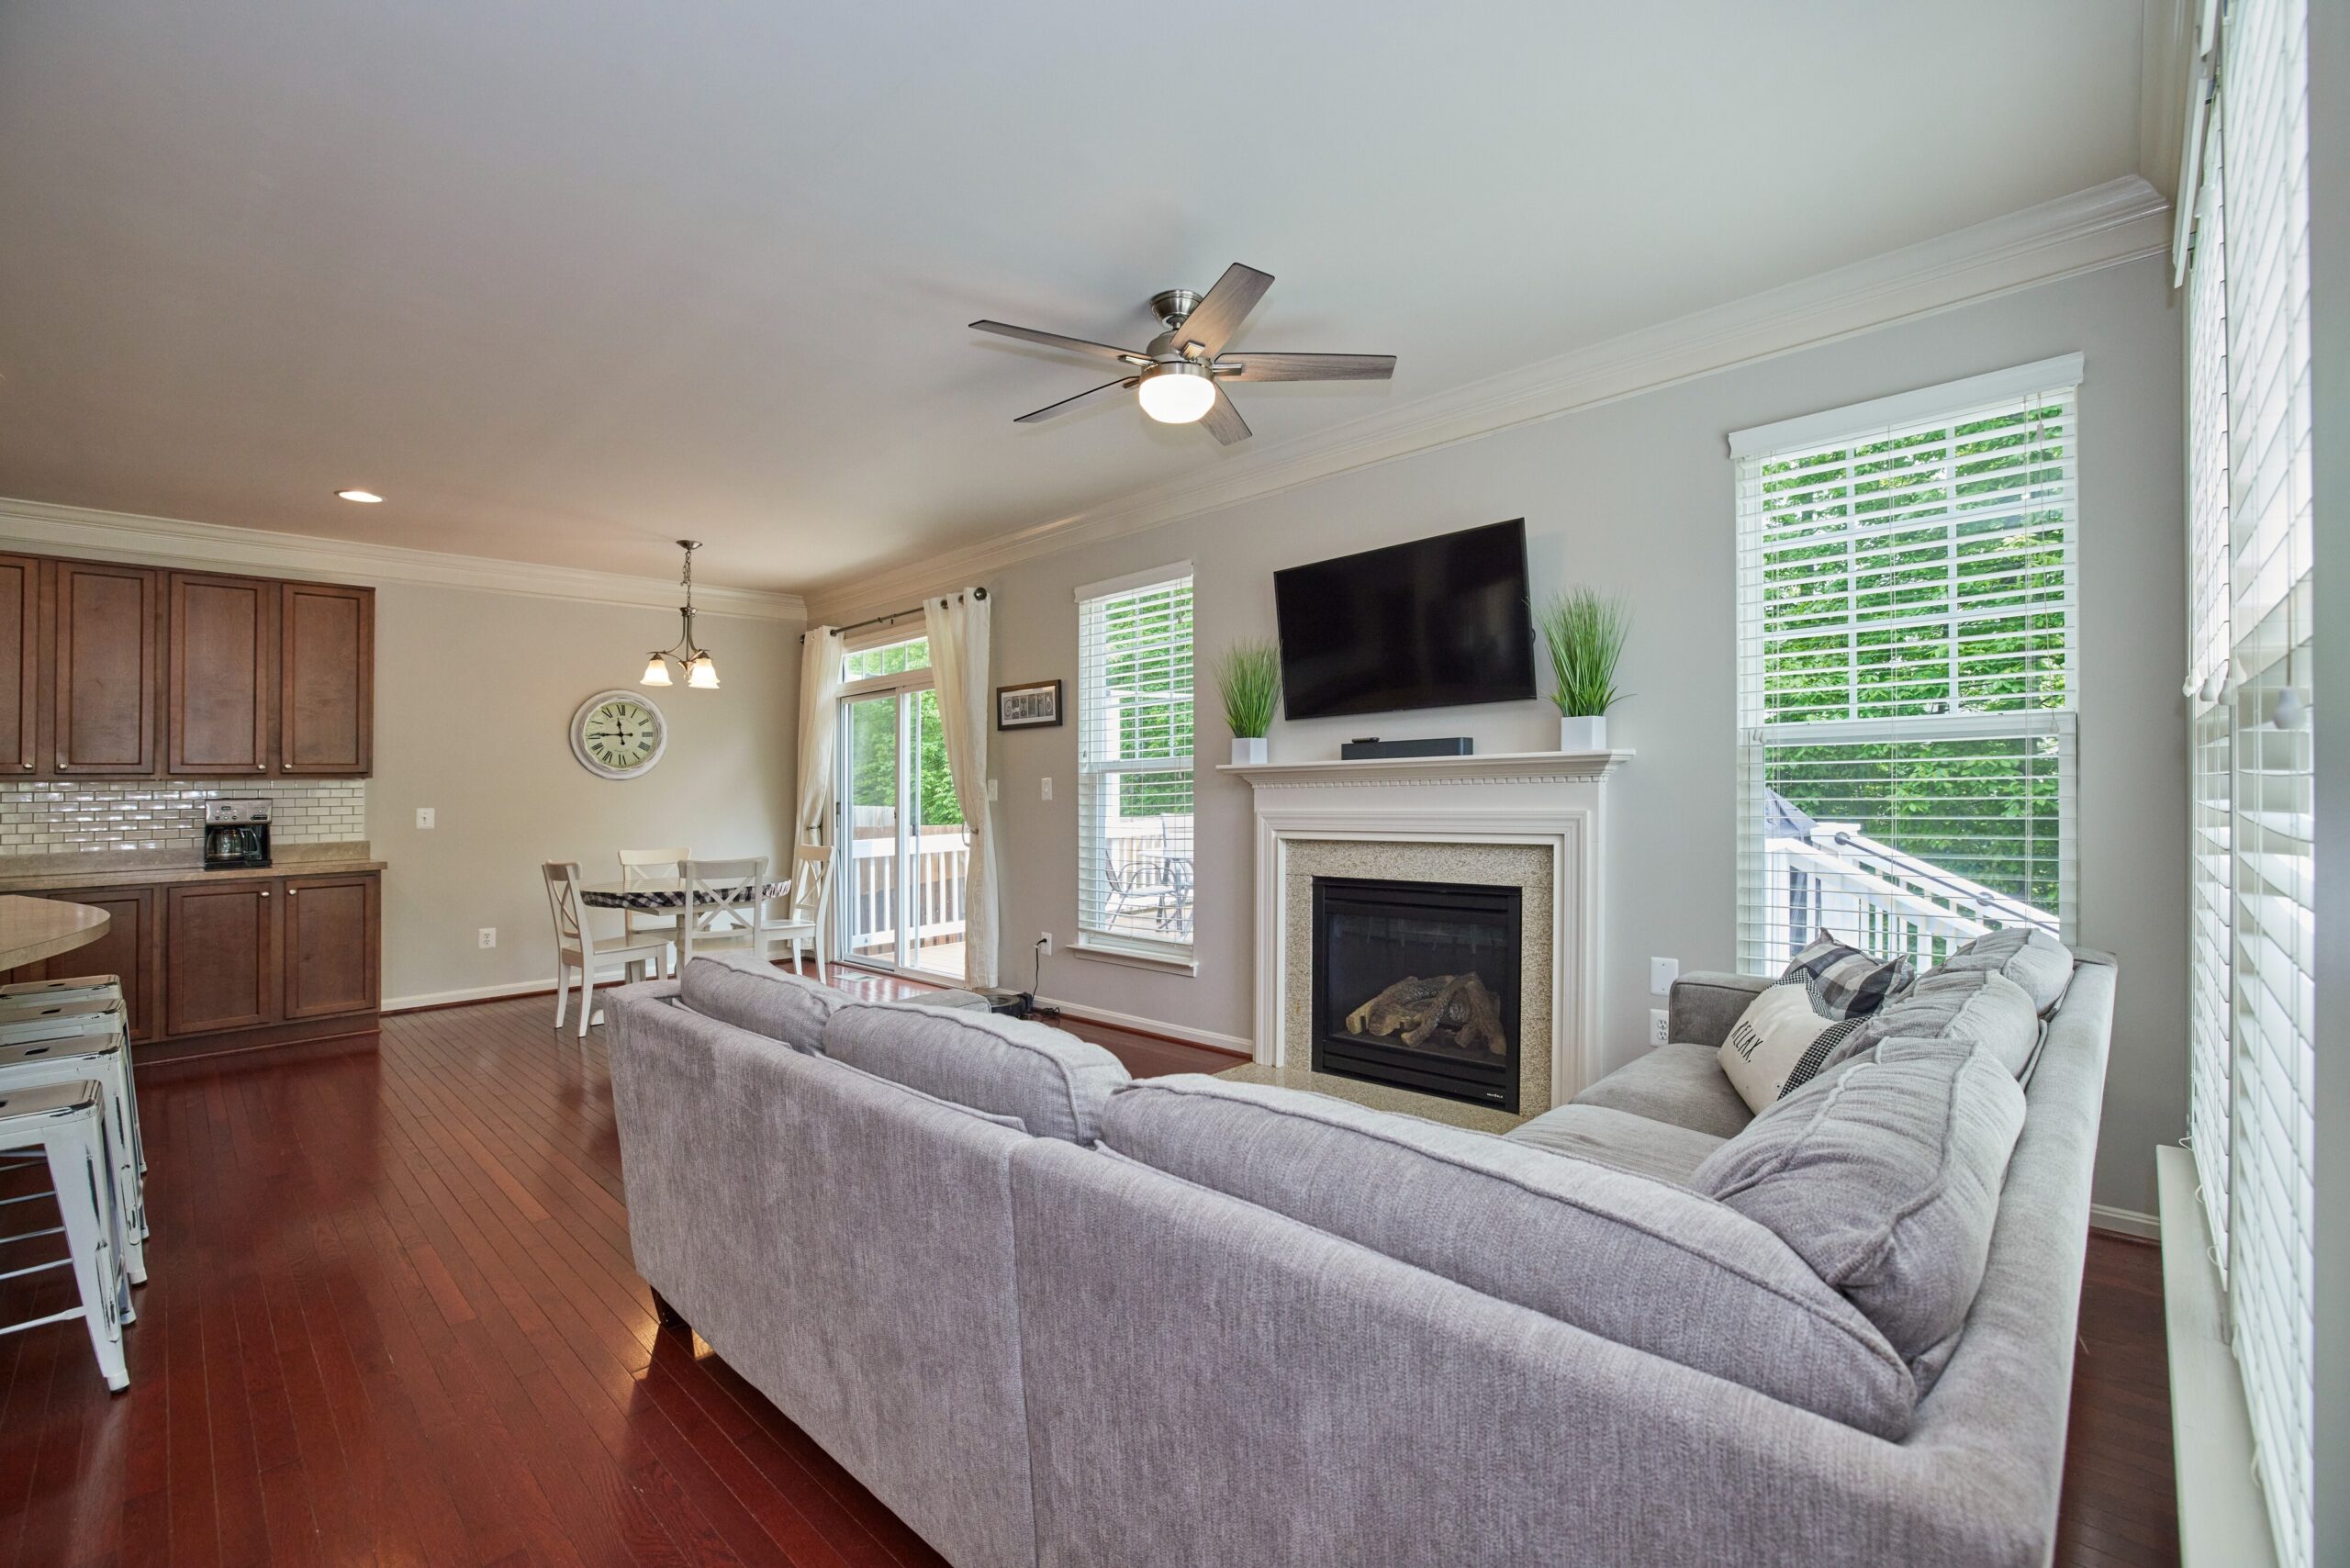 Professional interior photo of 12030 Lake Dorian Drive, Bristow, VA - showing the living room adjacent to the kitchen and the breakfast area in the background